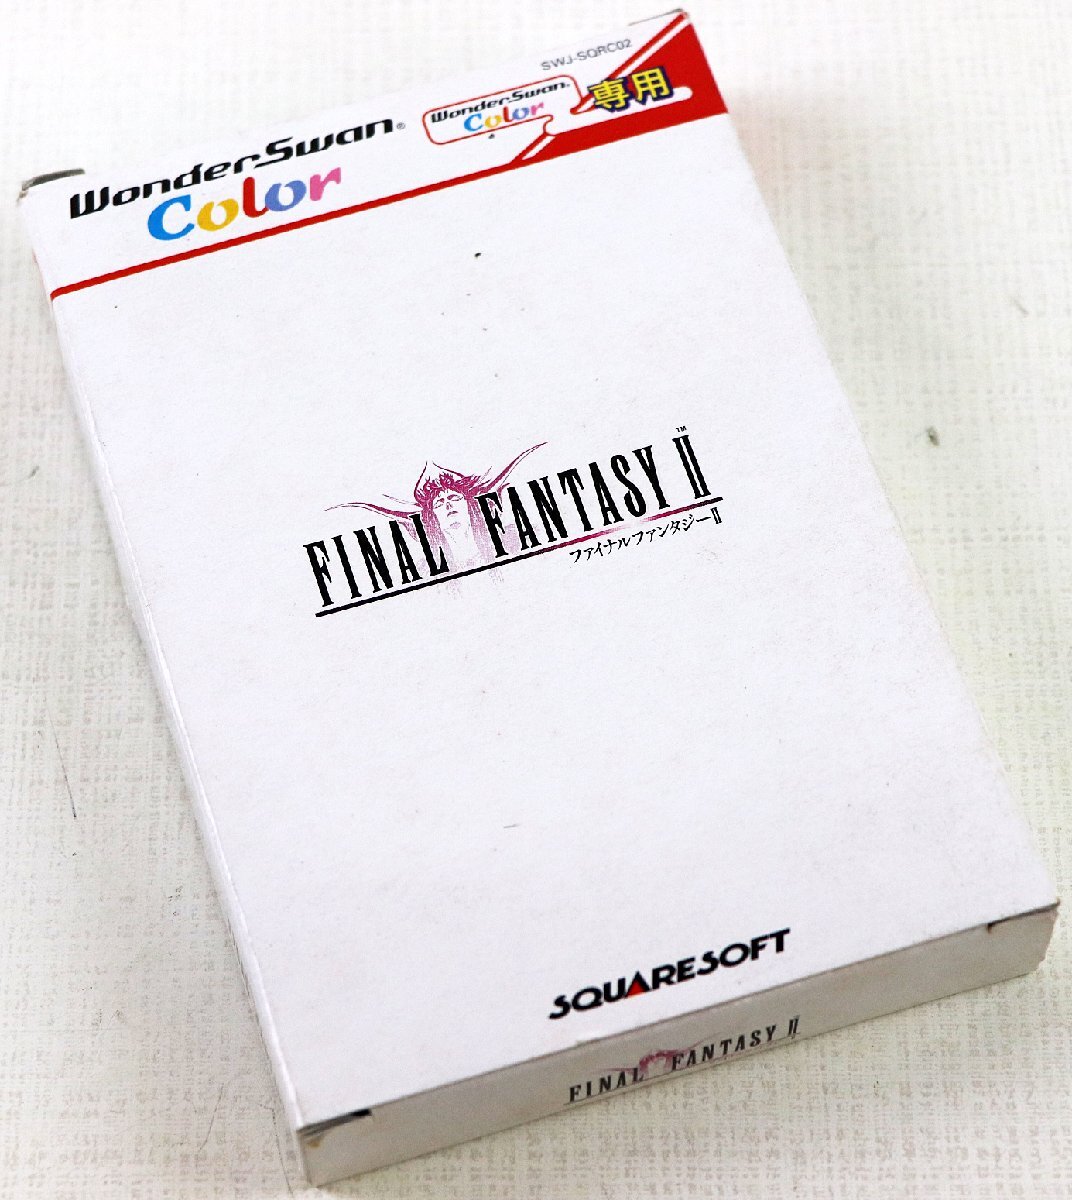 P! junk! WonderSwan color soft [ Final Fantasy Ⅱ] SQUARE SOFT( reality :SQUARE ENIX) * use scratch * dirty have / operation not yet verification 